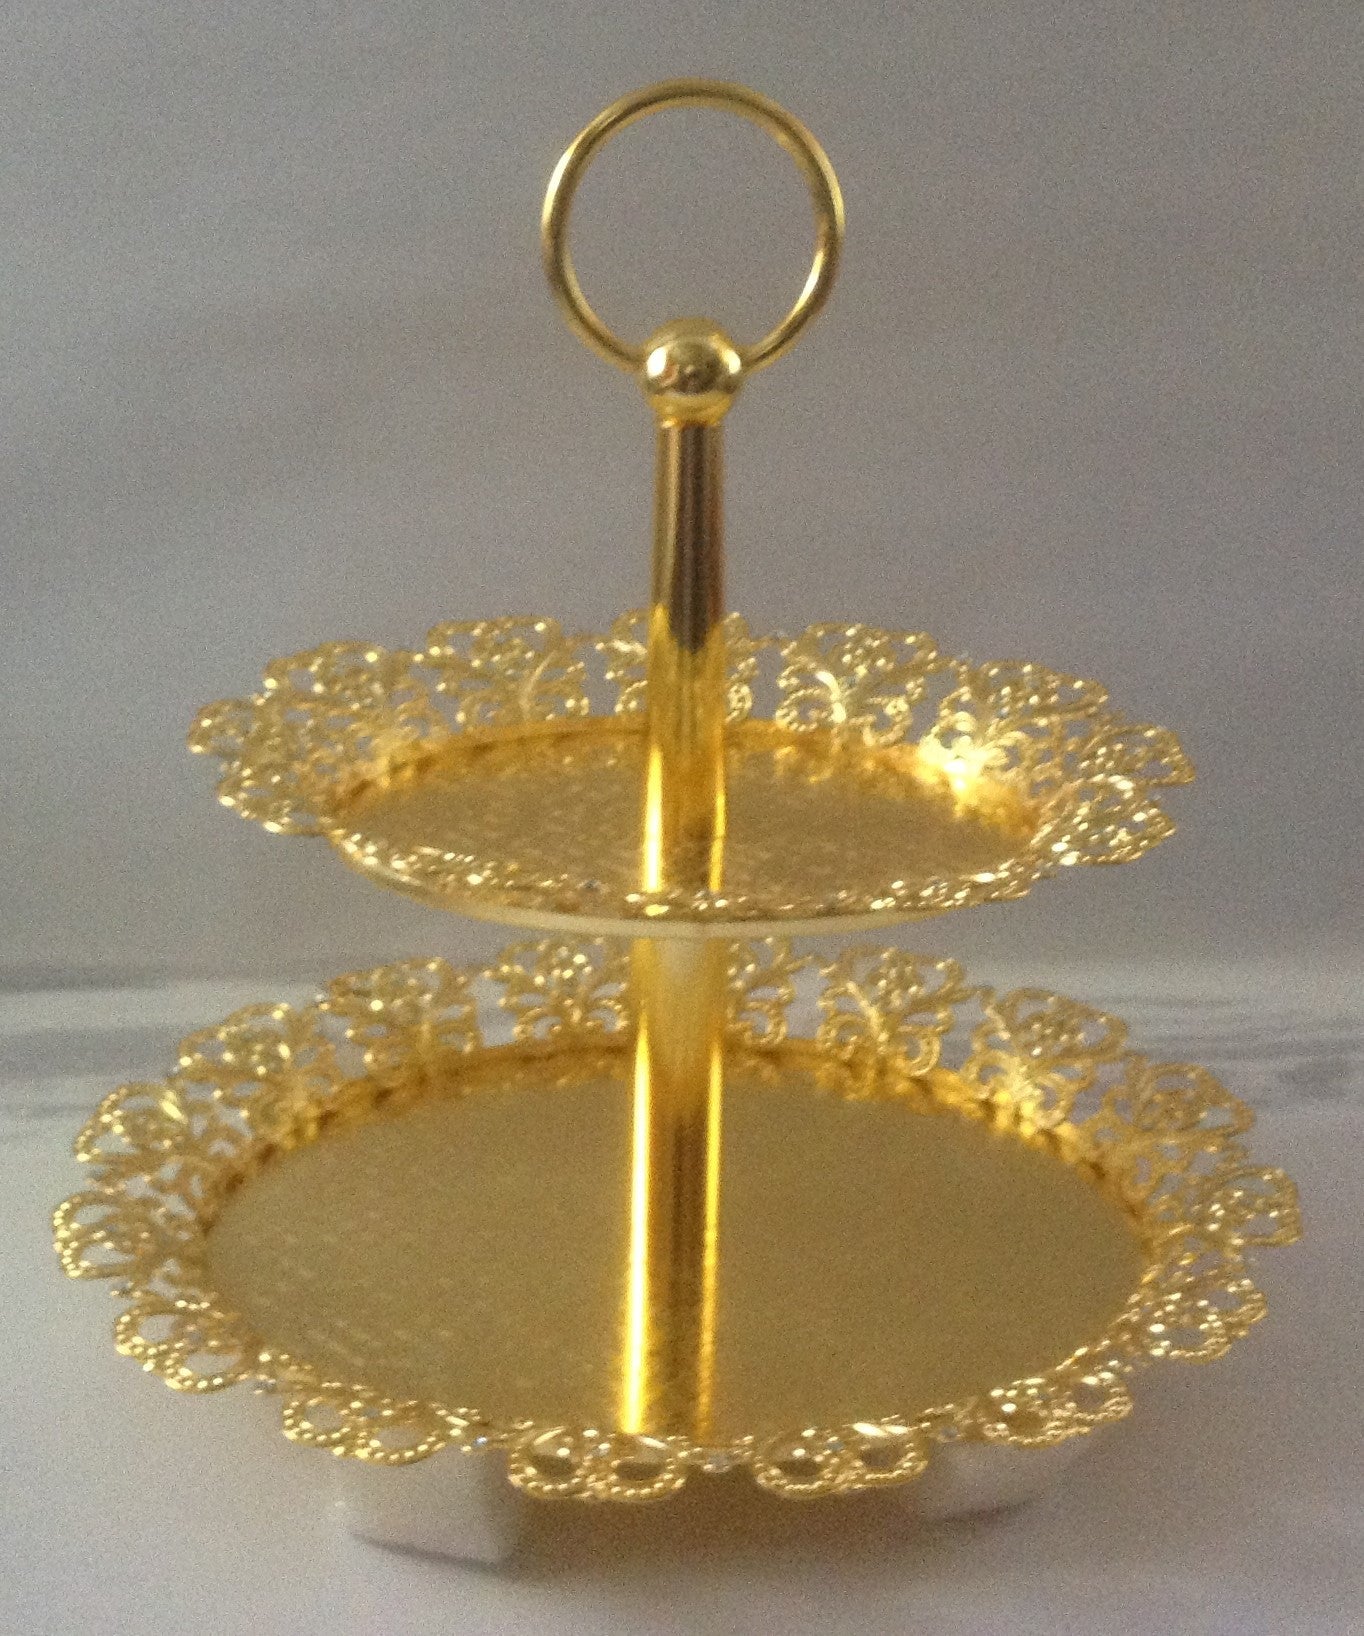 SAT 1012 - Two Tier Chocolate/display tray Royal collection